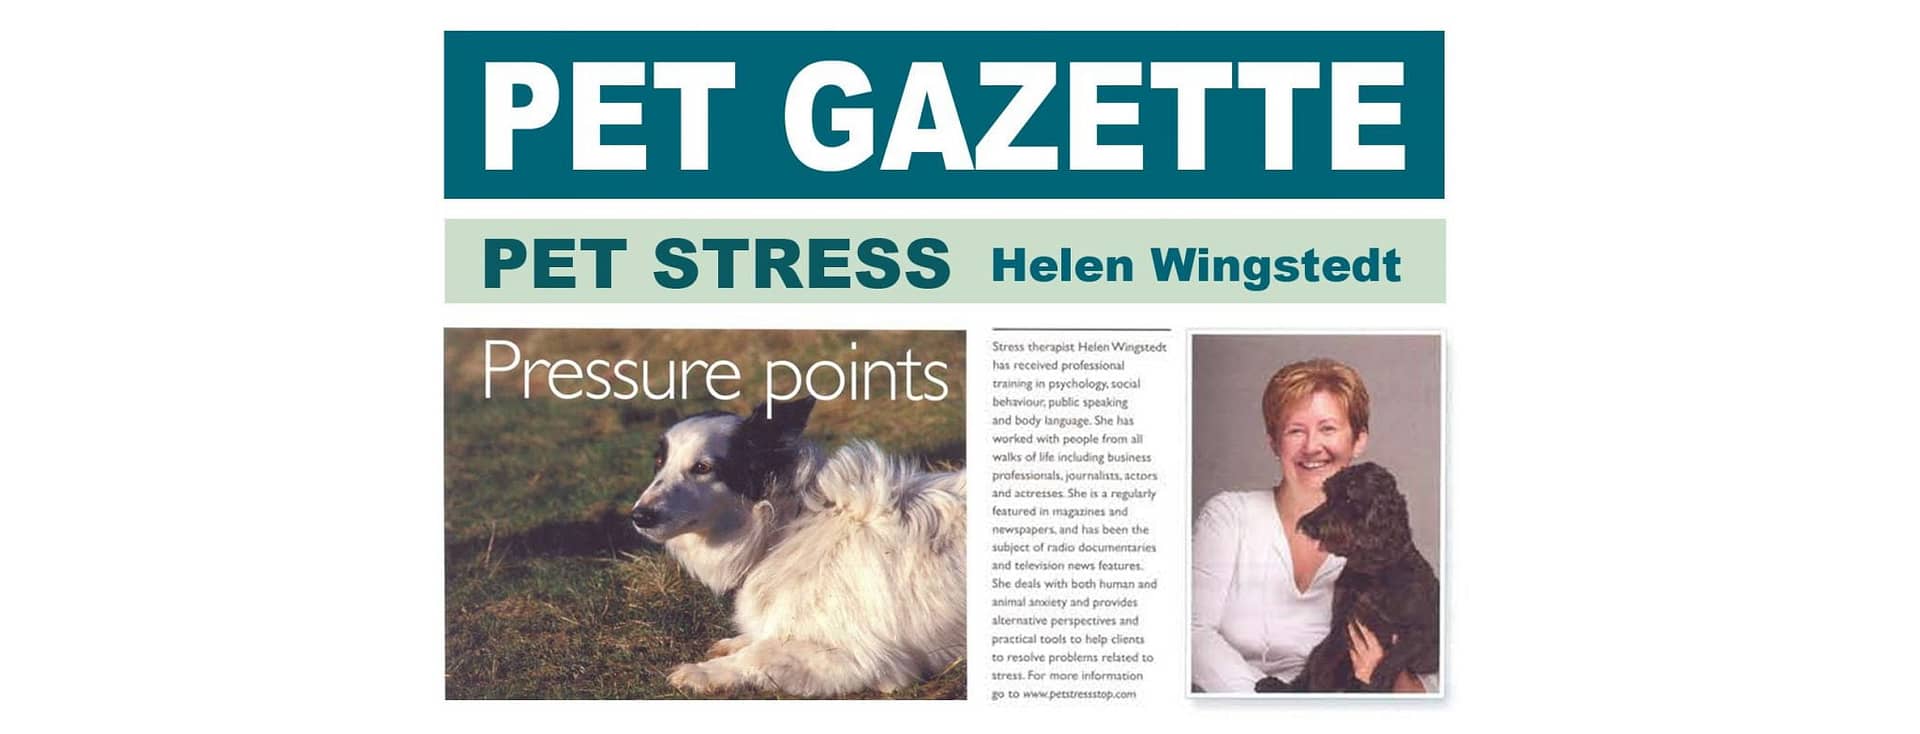 Helen Wingstedt in the Pet Gazette on canine stress